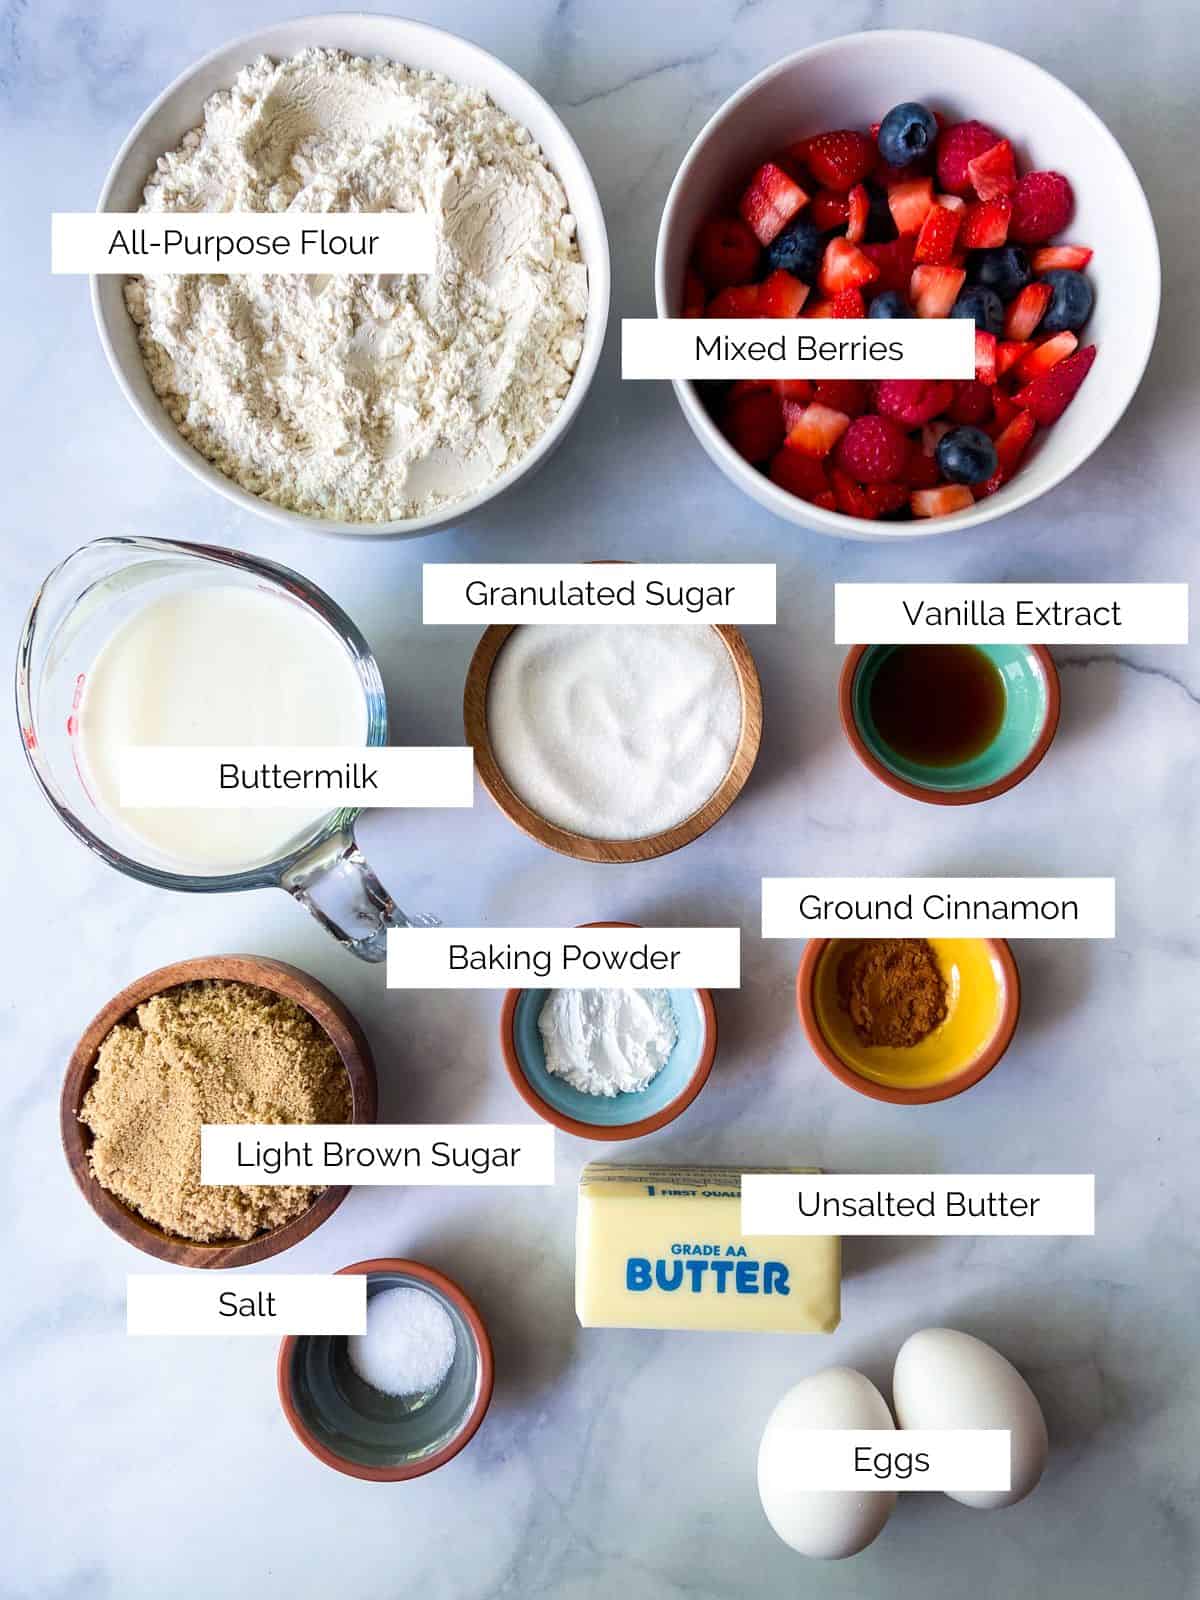 The ingredients you need for this recipe.